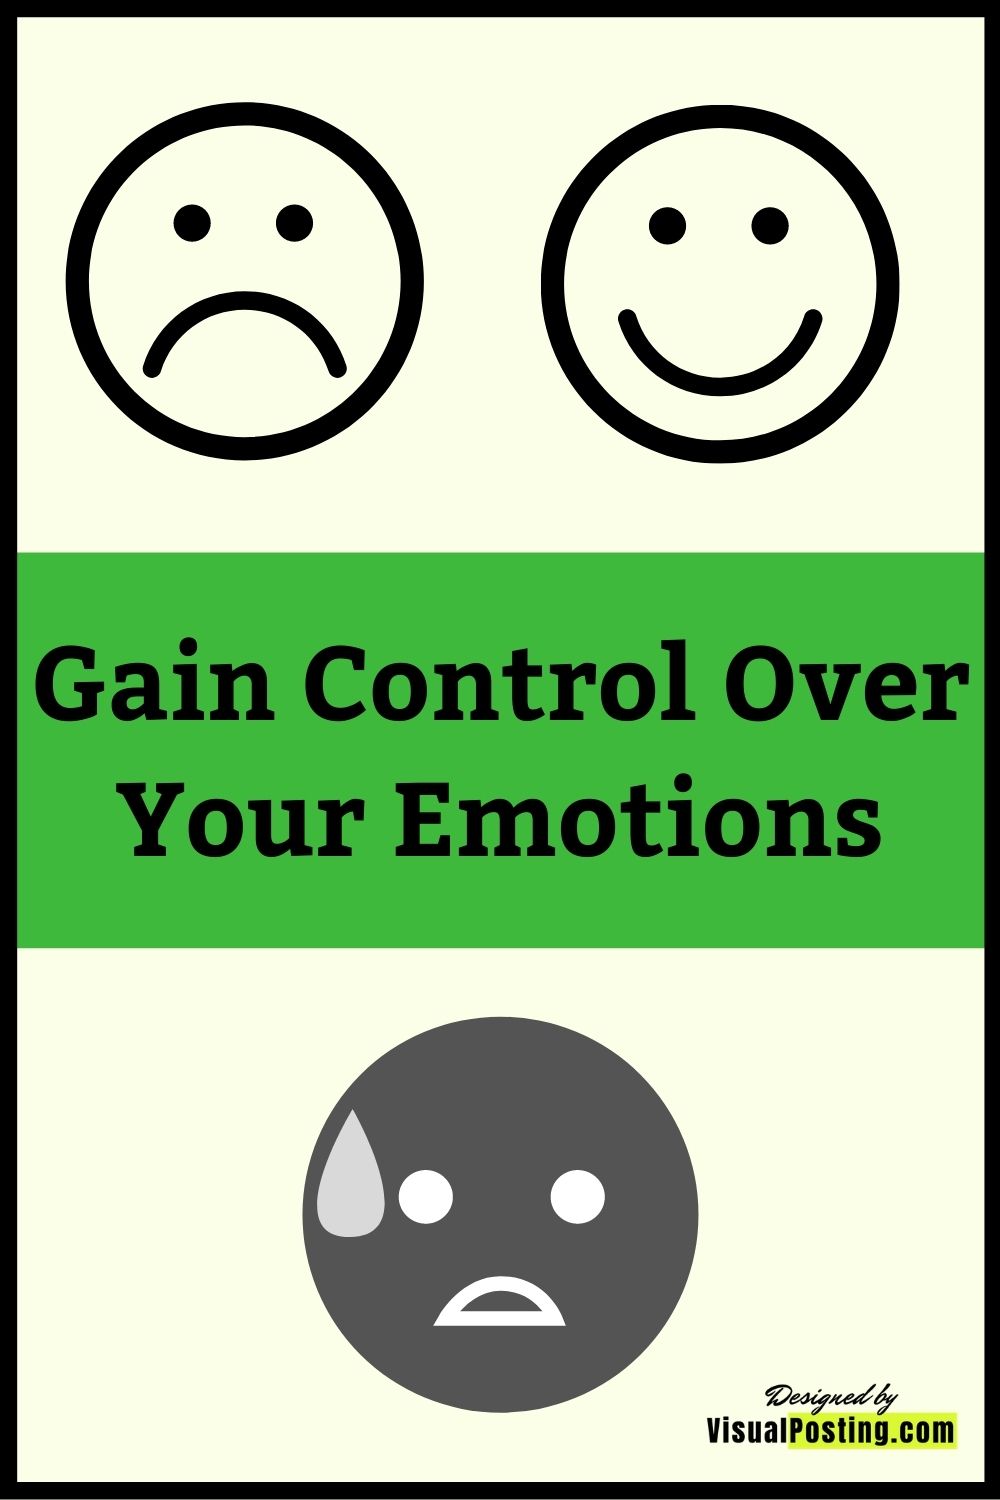 Gain control over your emotions.jpg